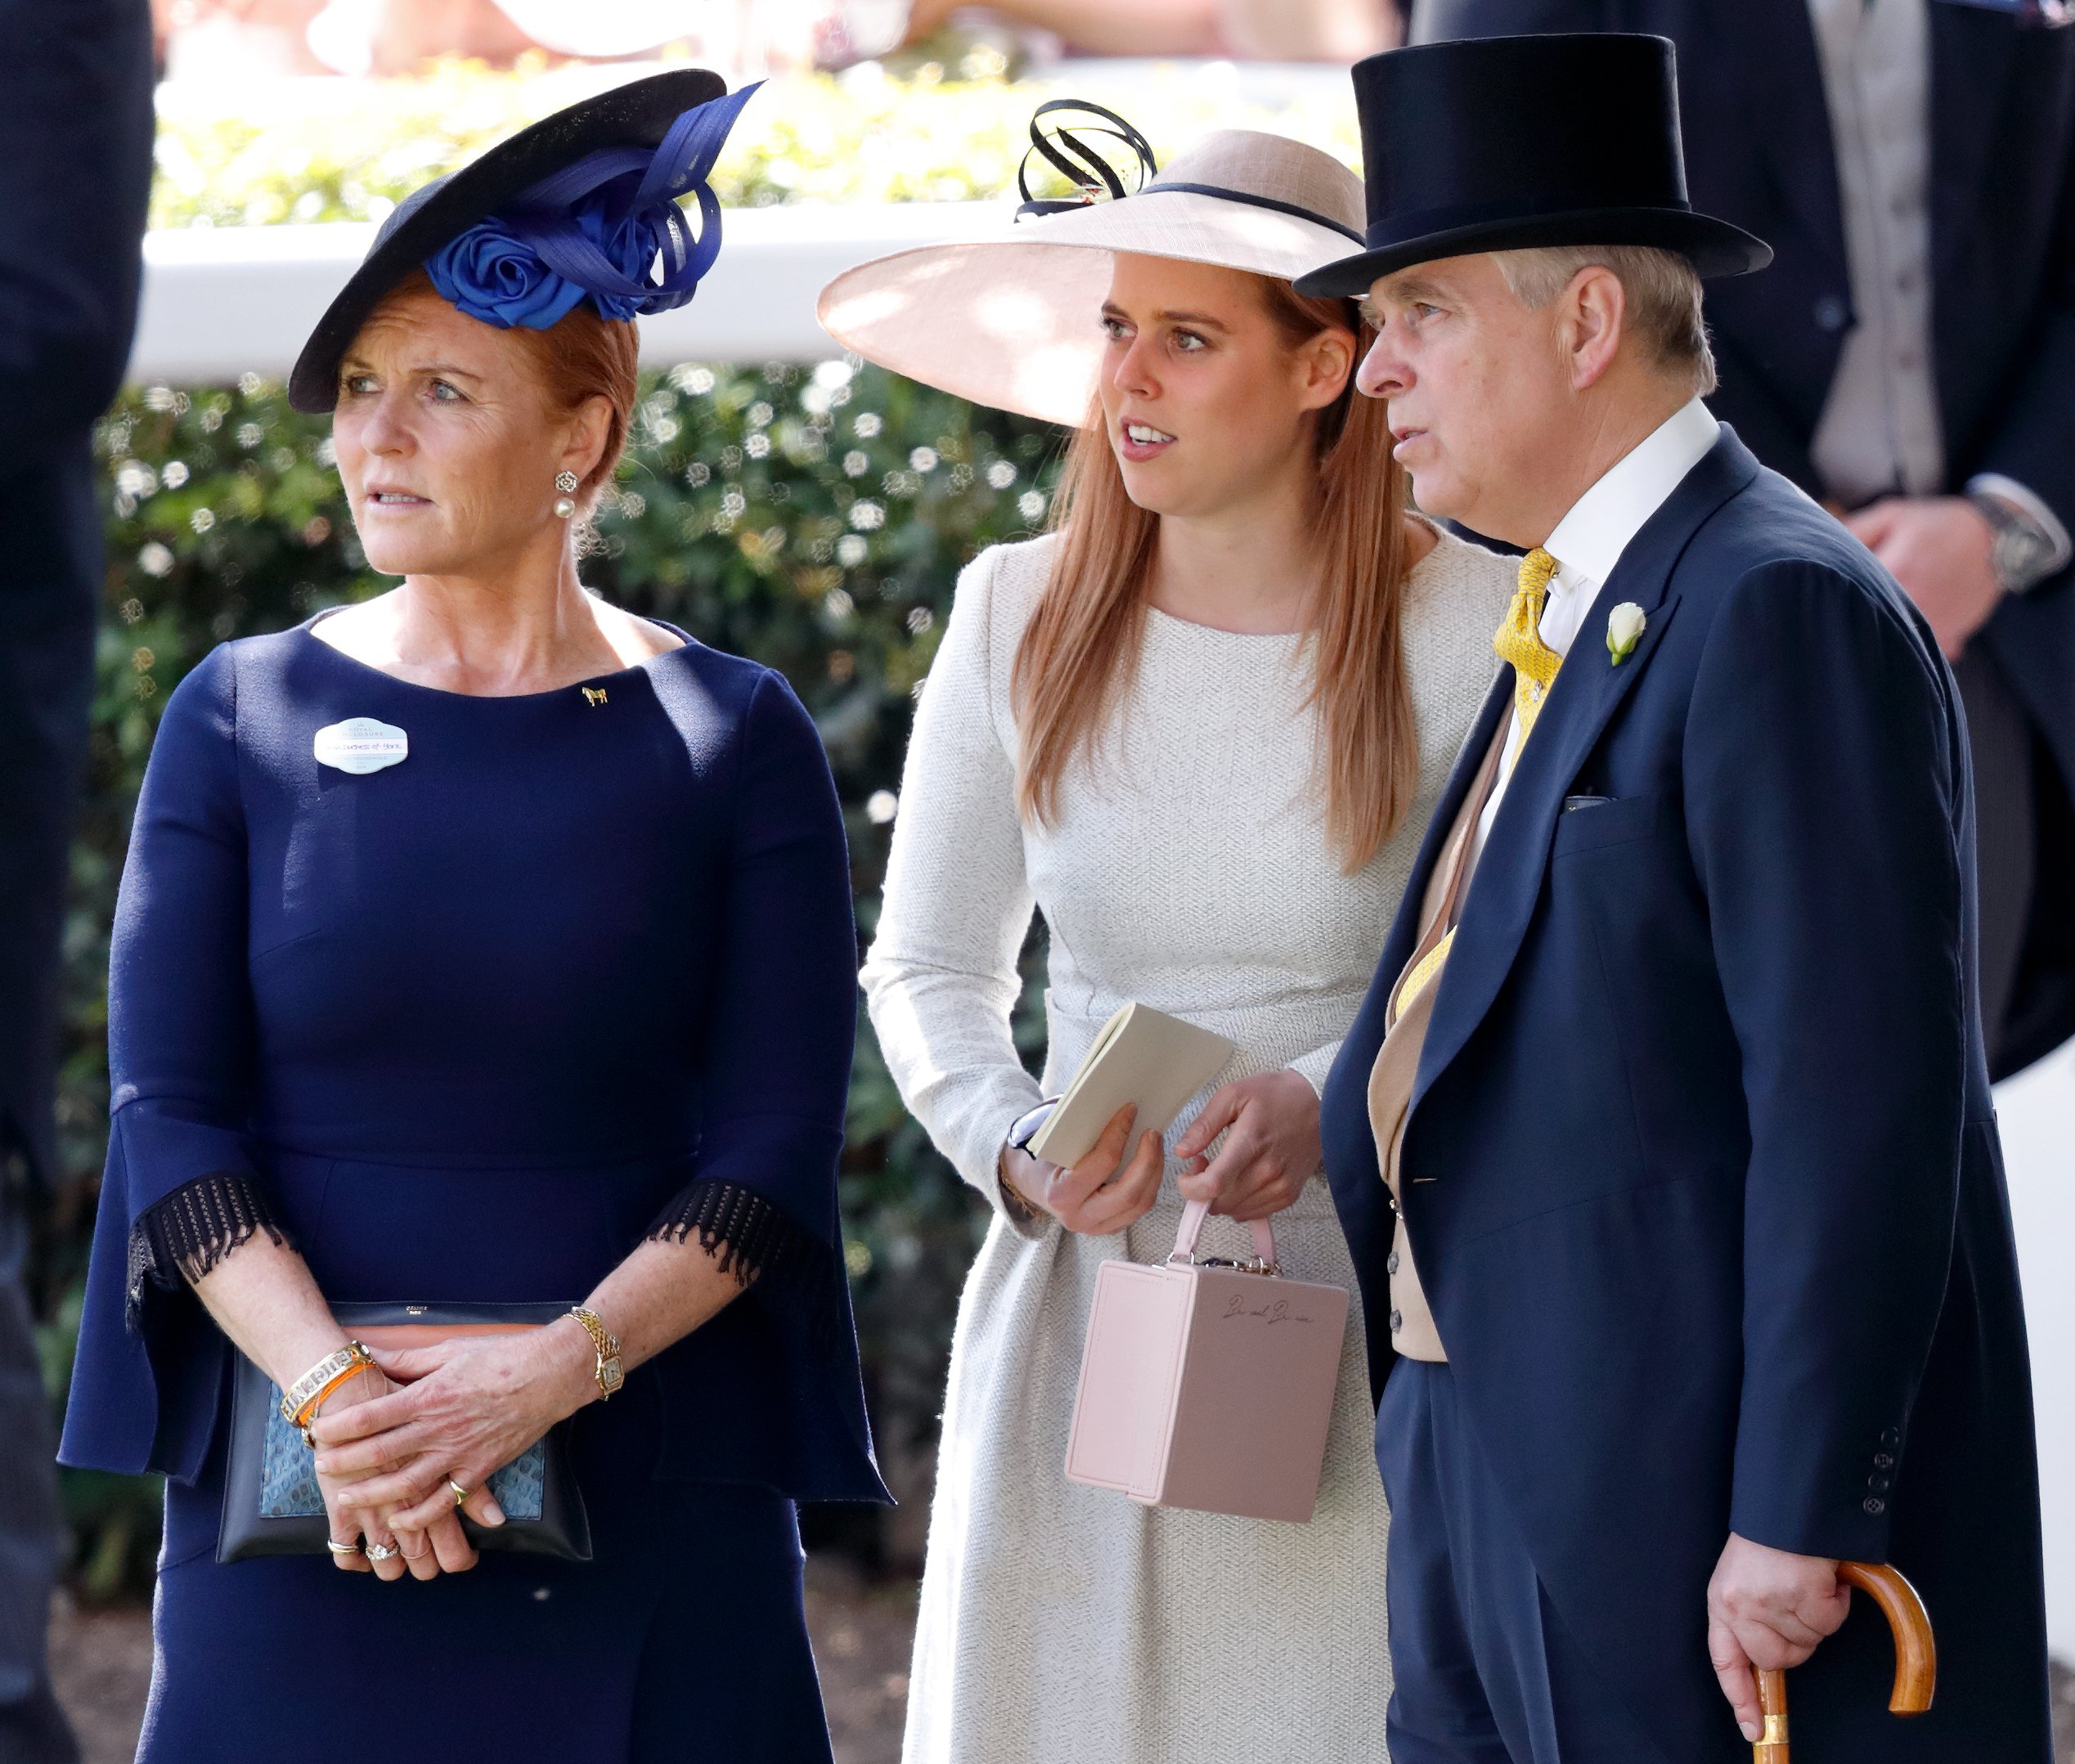 Sarah Ferguson, Princess Beatrice, and Prince Andrew during day 4 of Royal Ascot at Ascot Racecourse on June 22, 2018 in Ascot, England. / Source: Getty Images